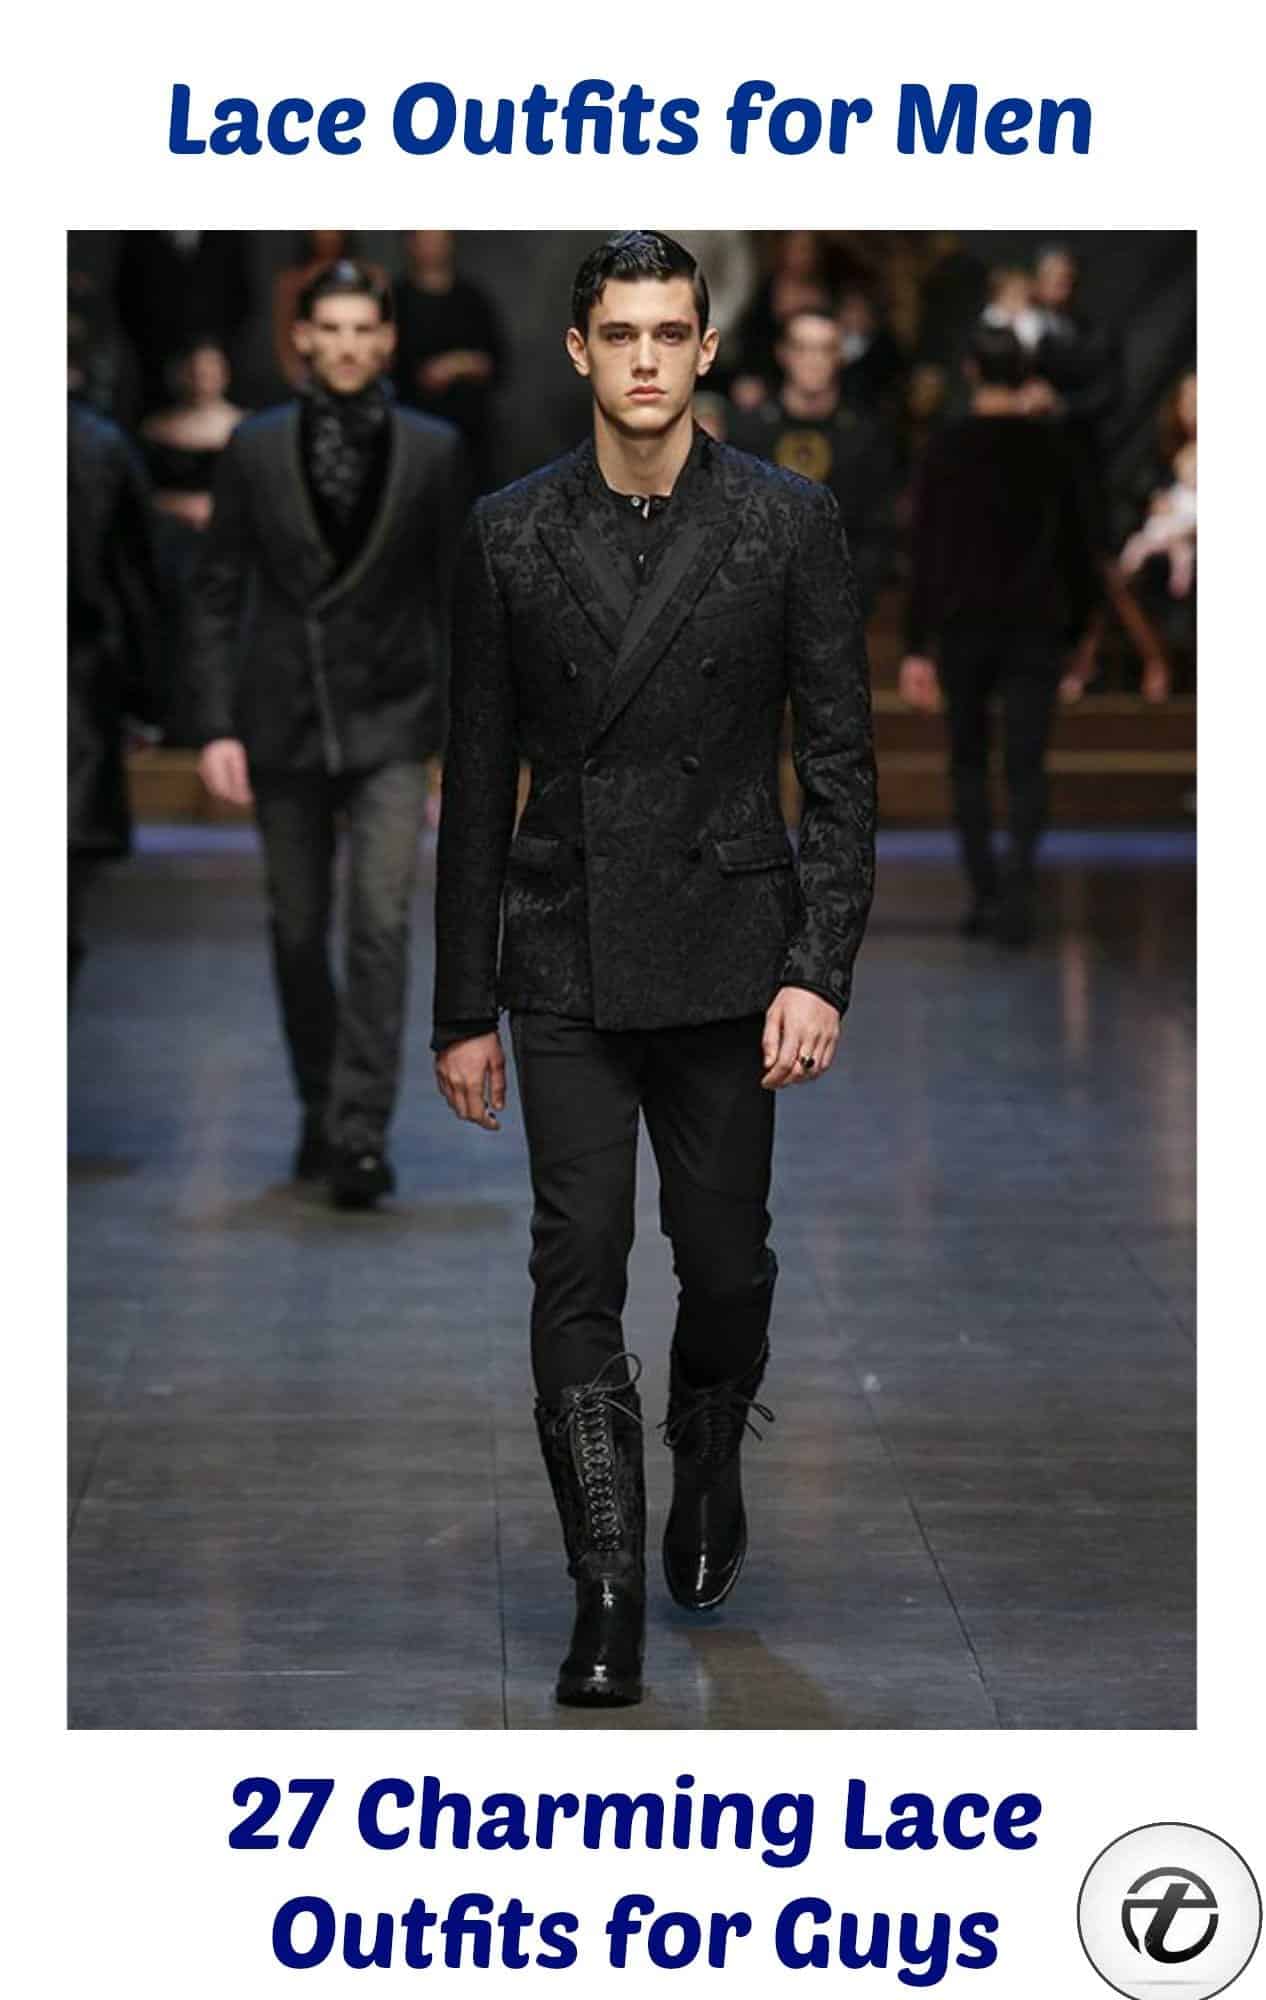 Lace Outfits for Men